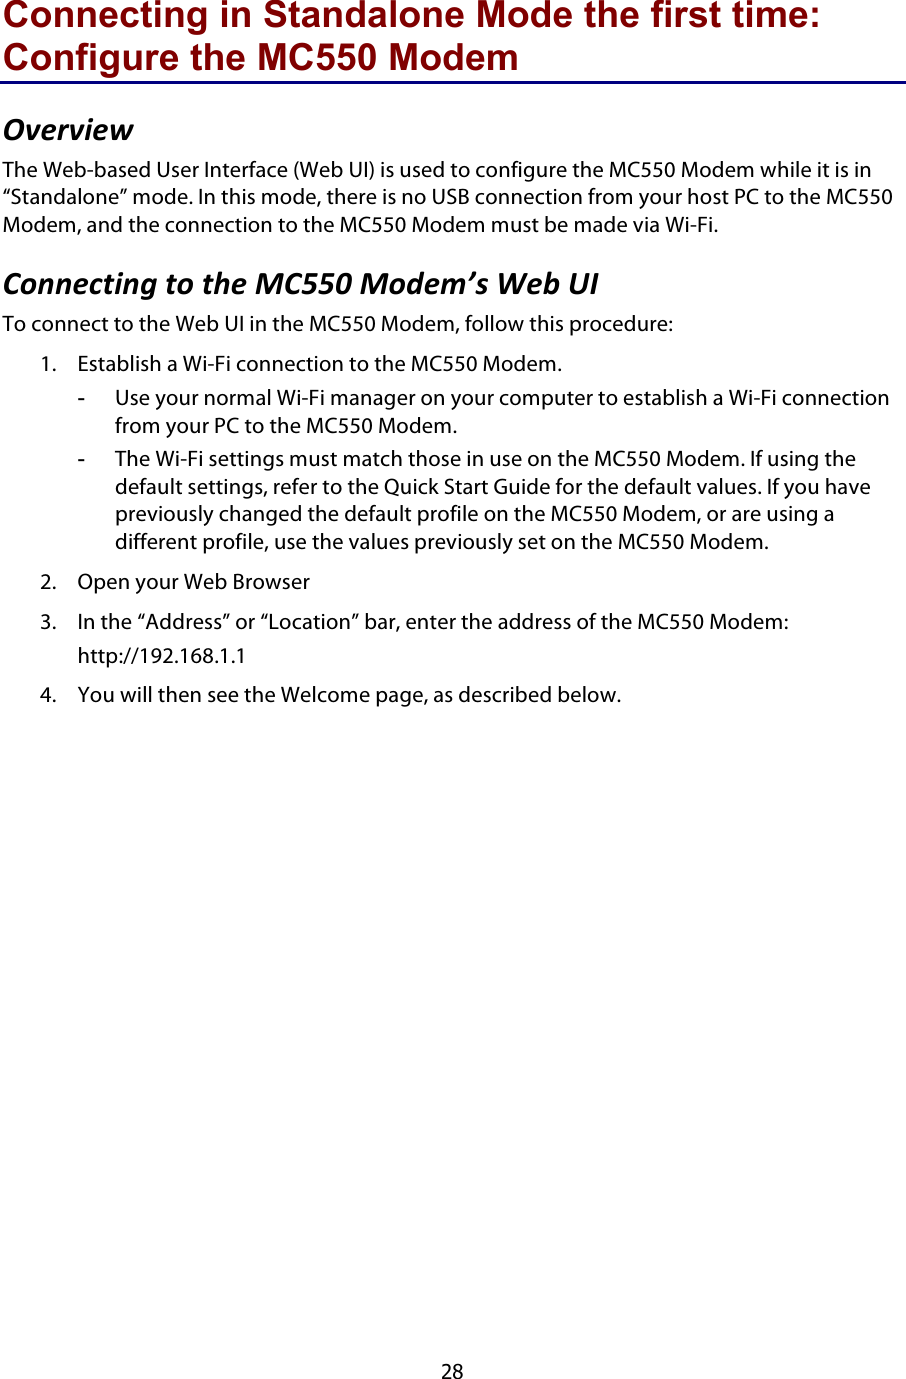  28 Connecting in Standalone Mode the first time: Configure the MC550 Modem MB#6B9#J$The Web-based User Interface (Web UI) is used to configure the MC550 Modem while it is in “Standalone” mode. In this mode, there is no USB connection from your host PC to the MC550 Modem, and the connection to the MC550 Modem must be made via Wi-Fi. &amp;)::#.39:0$3)$3&quot;#$%&amp;&apos;&apos;($%)*#+S7$@#&lt;$GN$To connect to the Web UI in the MC550 Modem, follow this procedure: 1. Establish a Wi-Fi connection to the MC550 Modem.  -  Use your normal Wi-Fi manager on your computer to establish a Wi-Fi connection from your PC to the MC550 Modem. -  The Wi-Fi settings must match those in use on the MC550 Modem. If using the default settings, refer to the Quick Start Guide for the default values. If you have previously changed the default profile on the MC550 Modem, or are using a different profile, use the values previously set on the MC550 Modem. 2. Open your Web Browser 3. In the “Address” or “Location” bar, enter the address of the MC550 Modem: http://192.168.1.1 4. You will then see the Welcome page, as described below. 